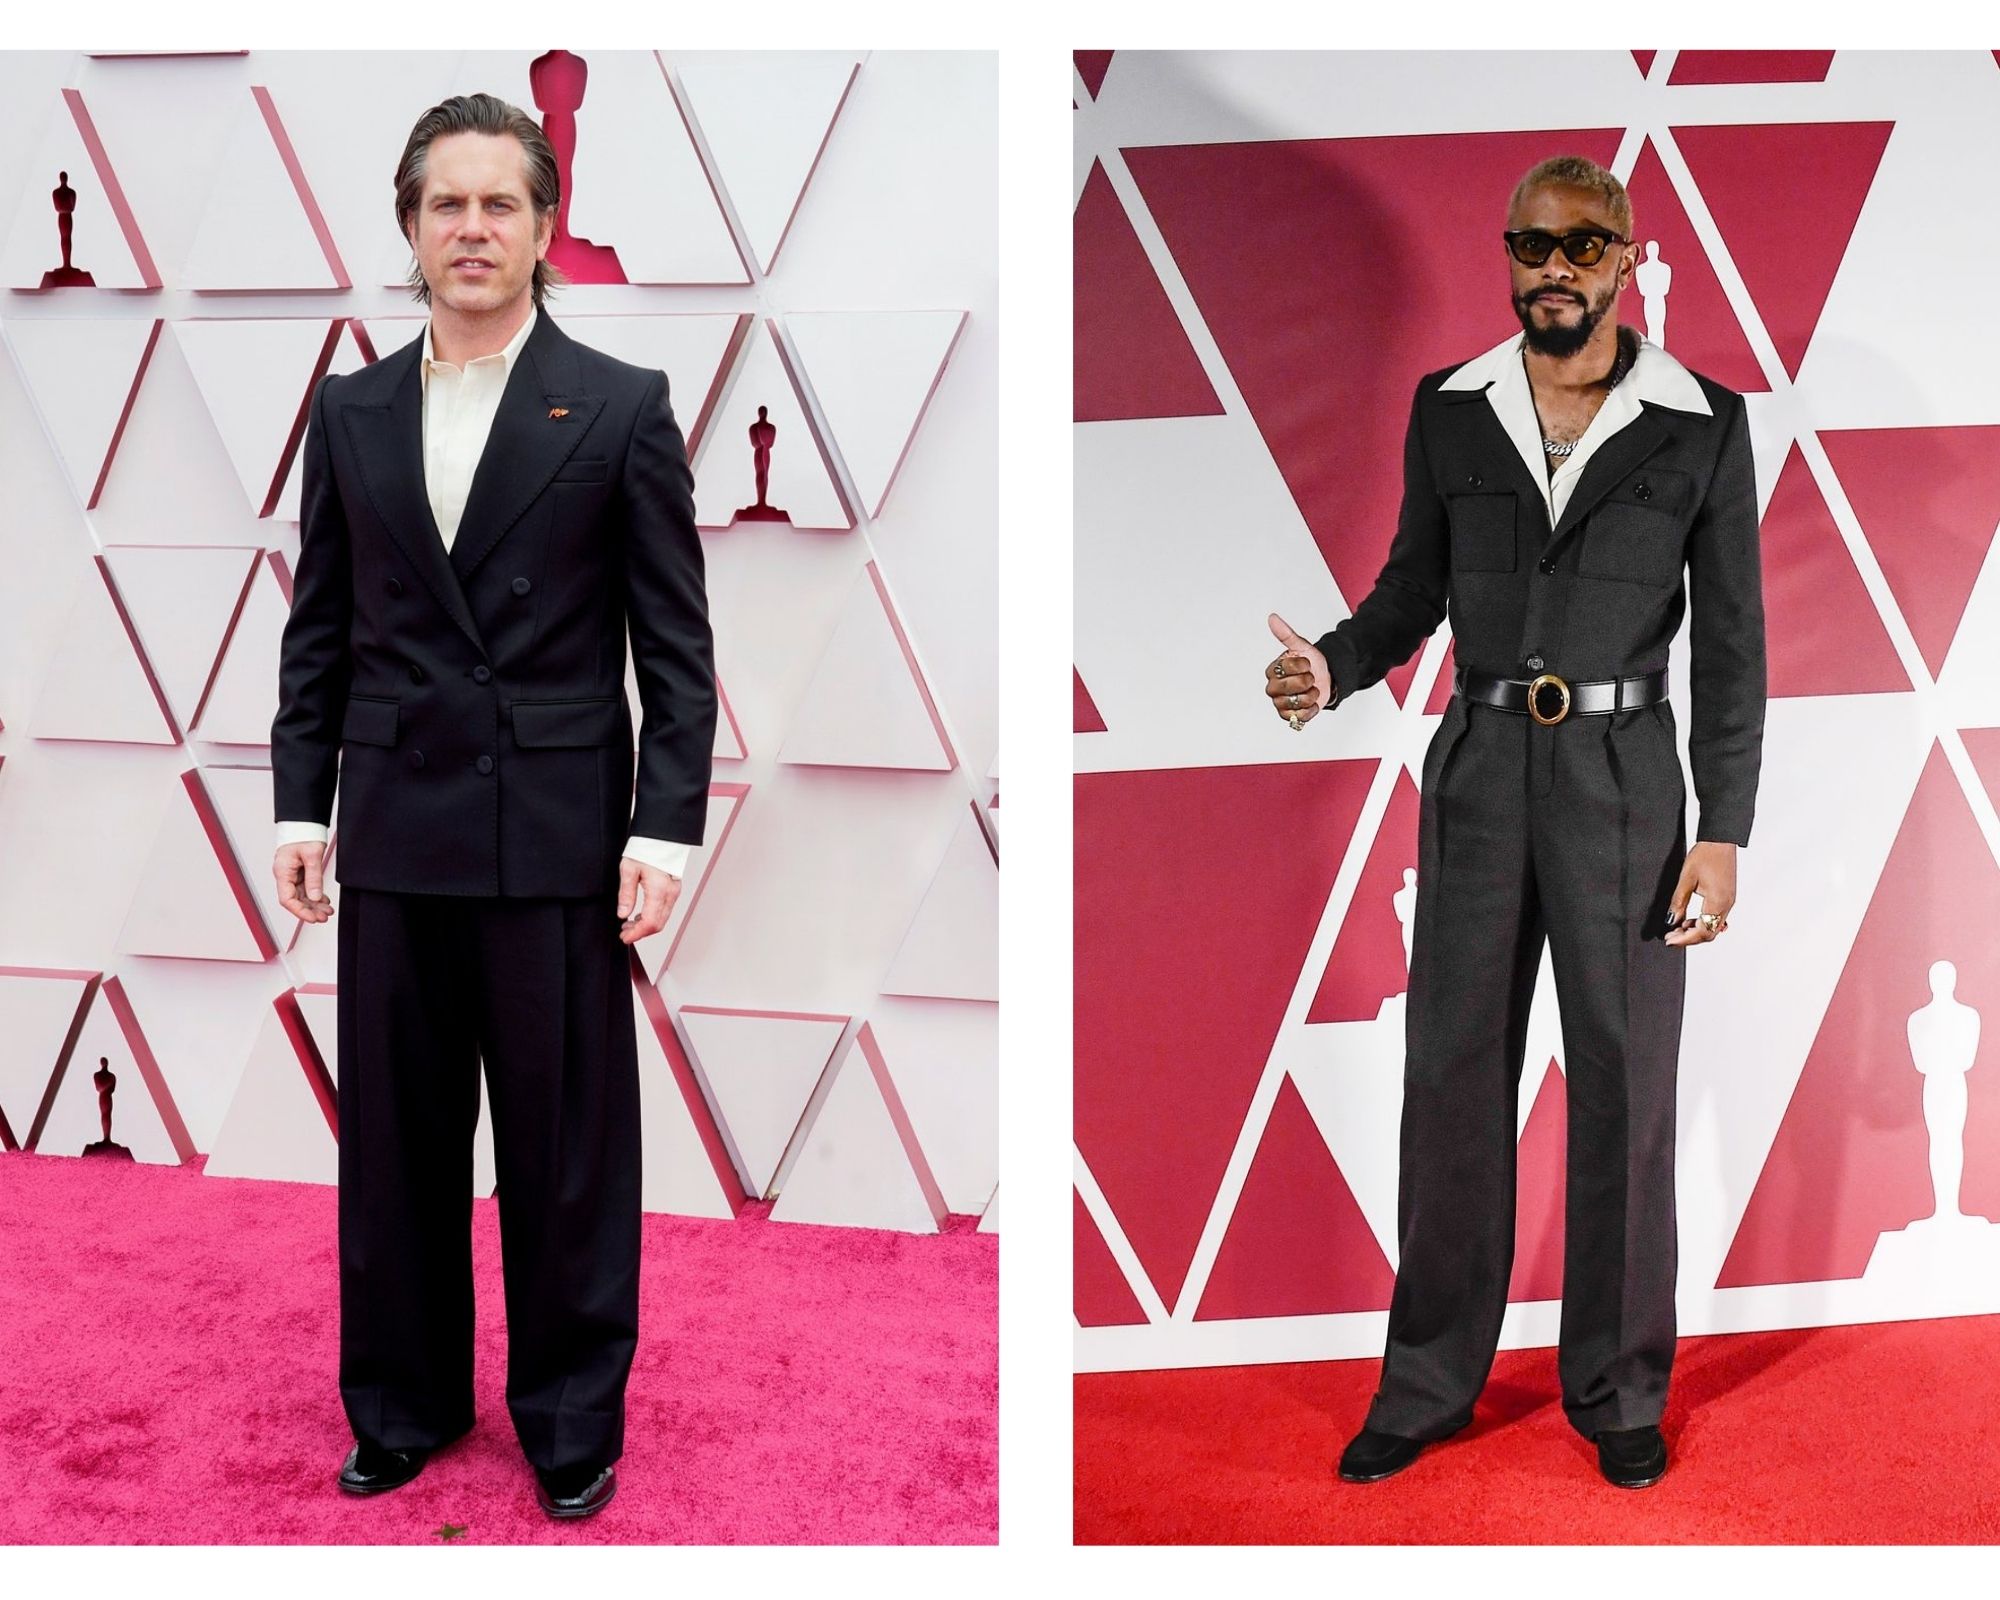 Oscars 2021, ¡una red carpet impecable!